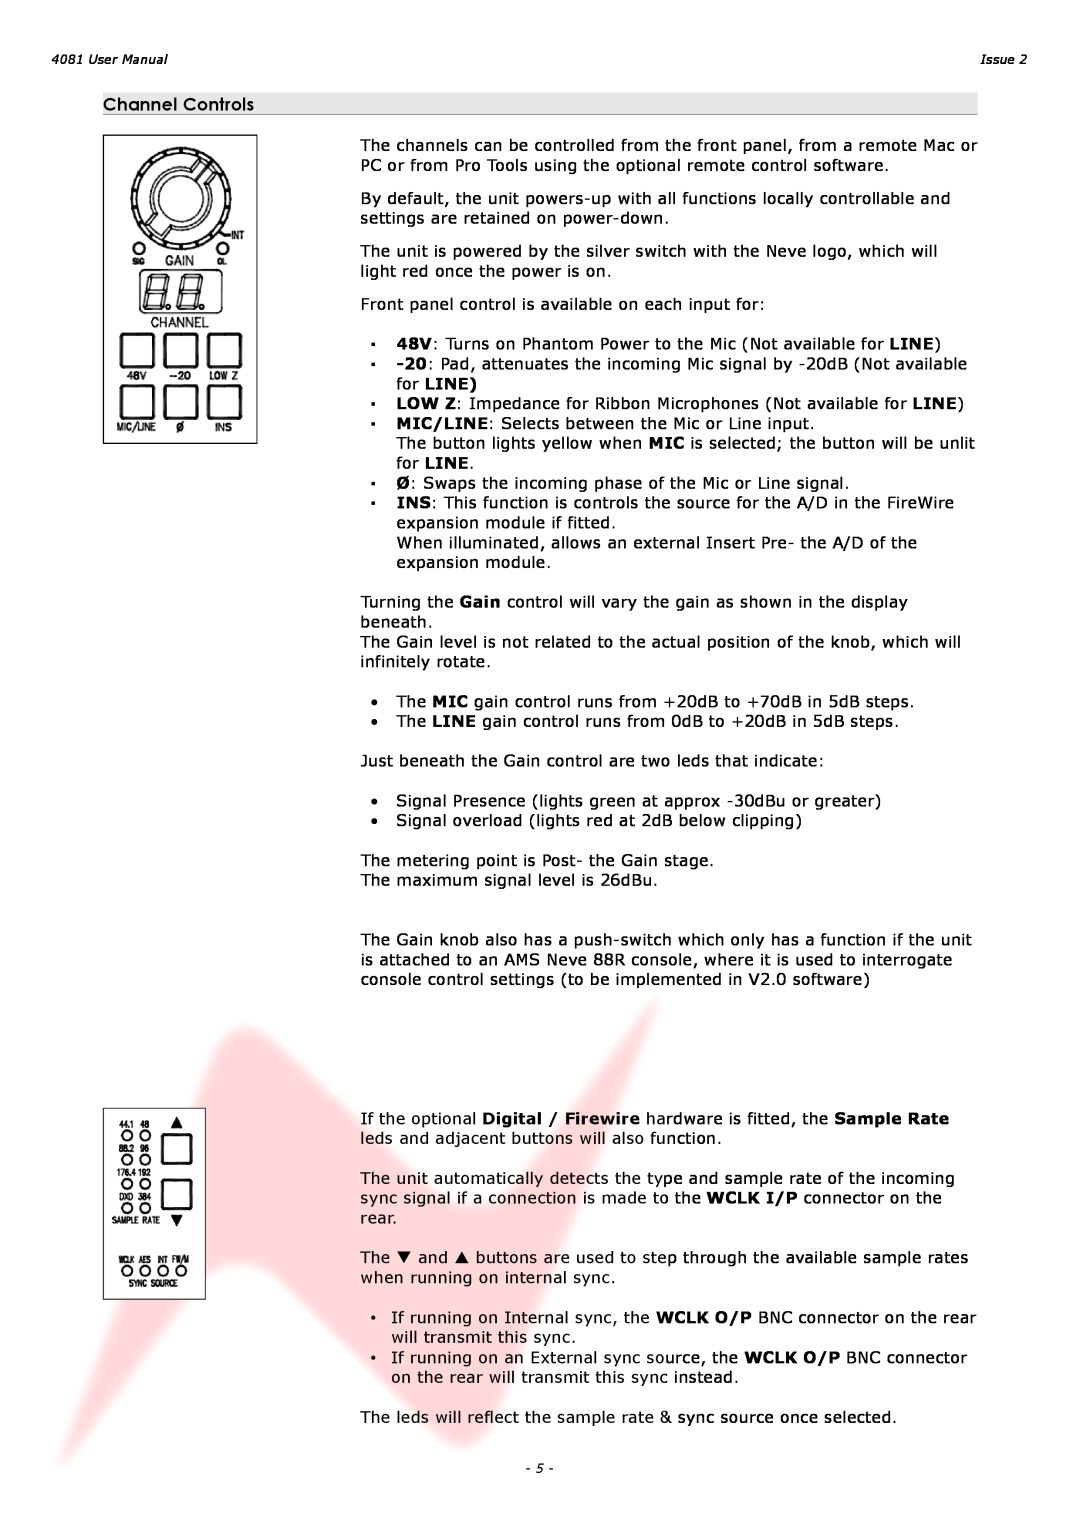 AMS 4081 user manual Channel Controls 